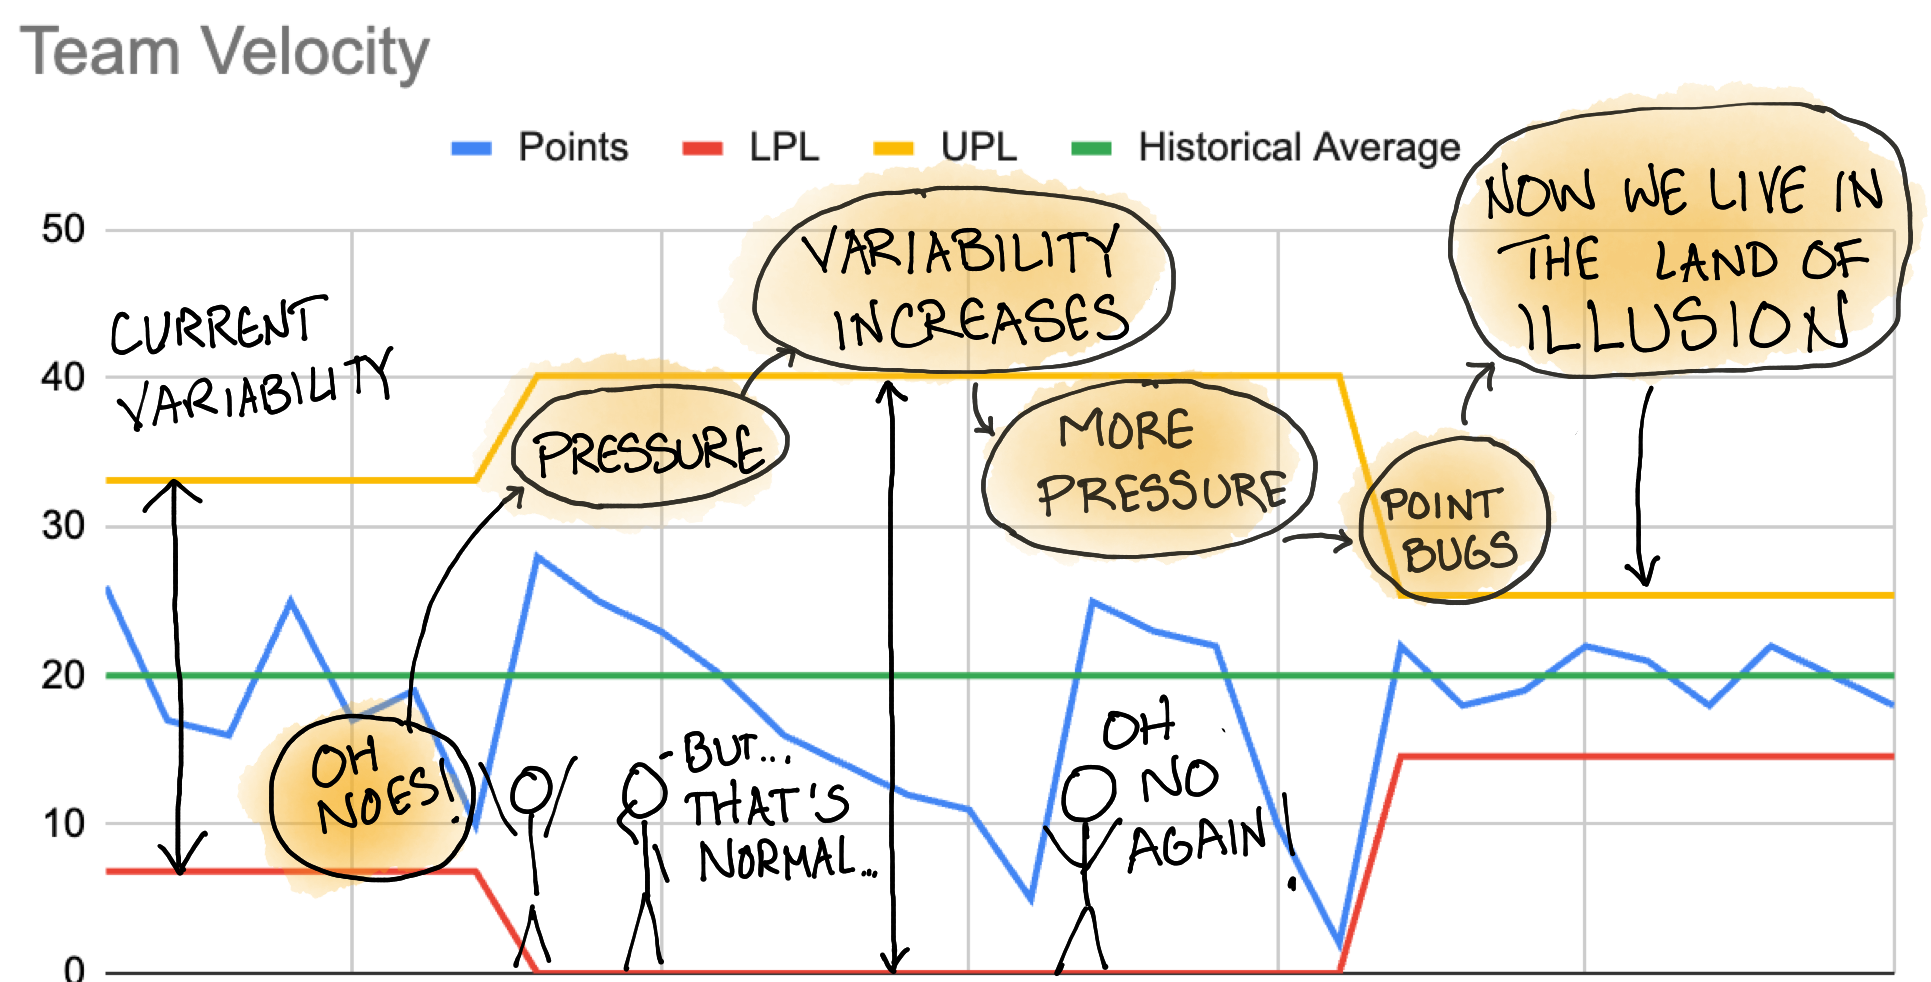 A graph showing velocity with lines for historical average, lower process limit (LPL), and upper process limit (UPL). Cartoon characters react to the data.